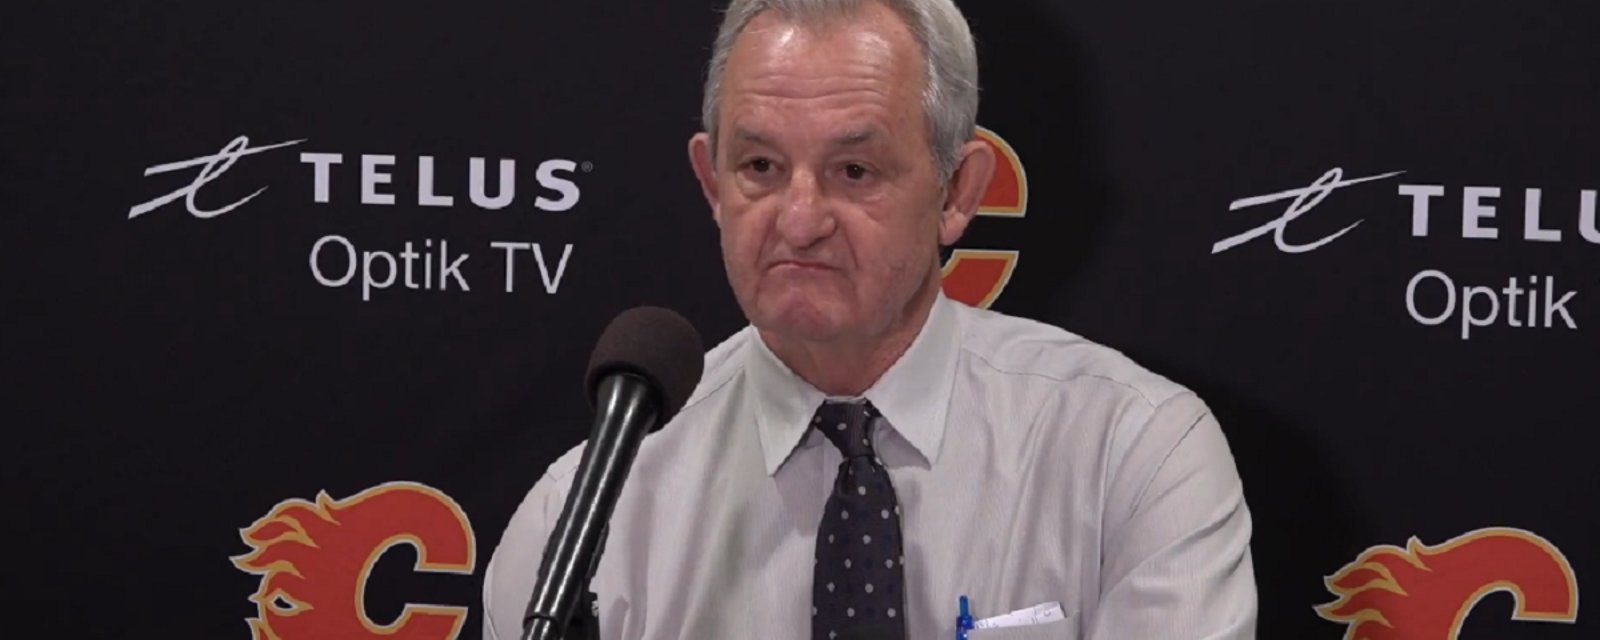 Flames reveal what they would get Darryl Sutter for Christmas.